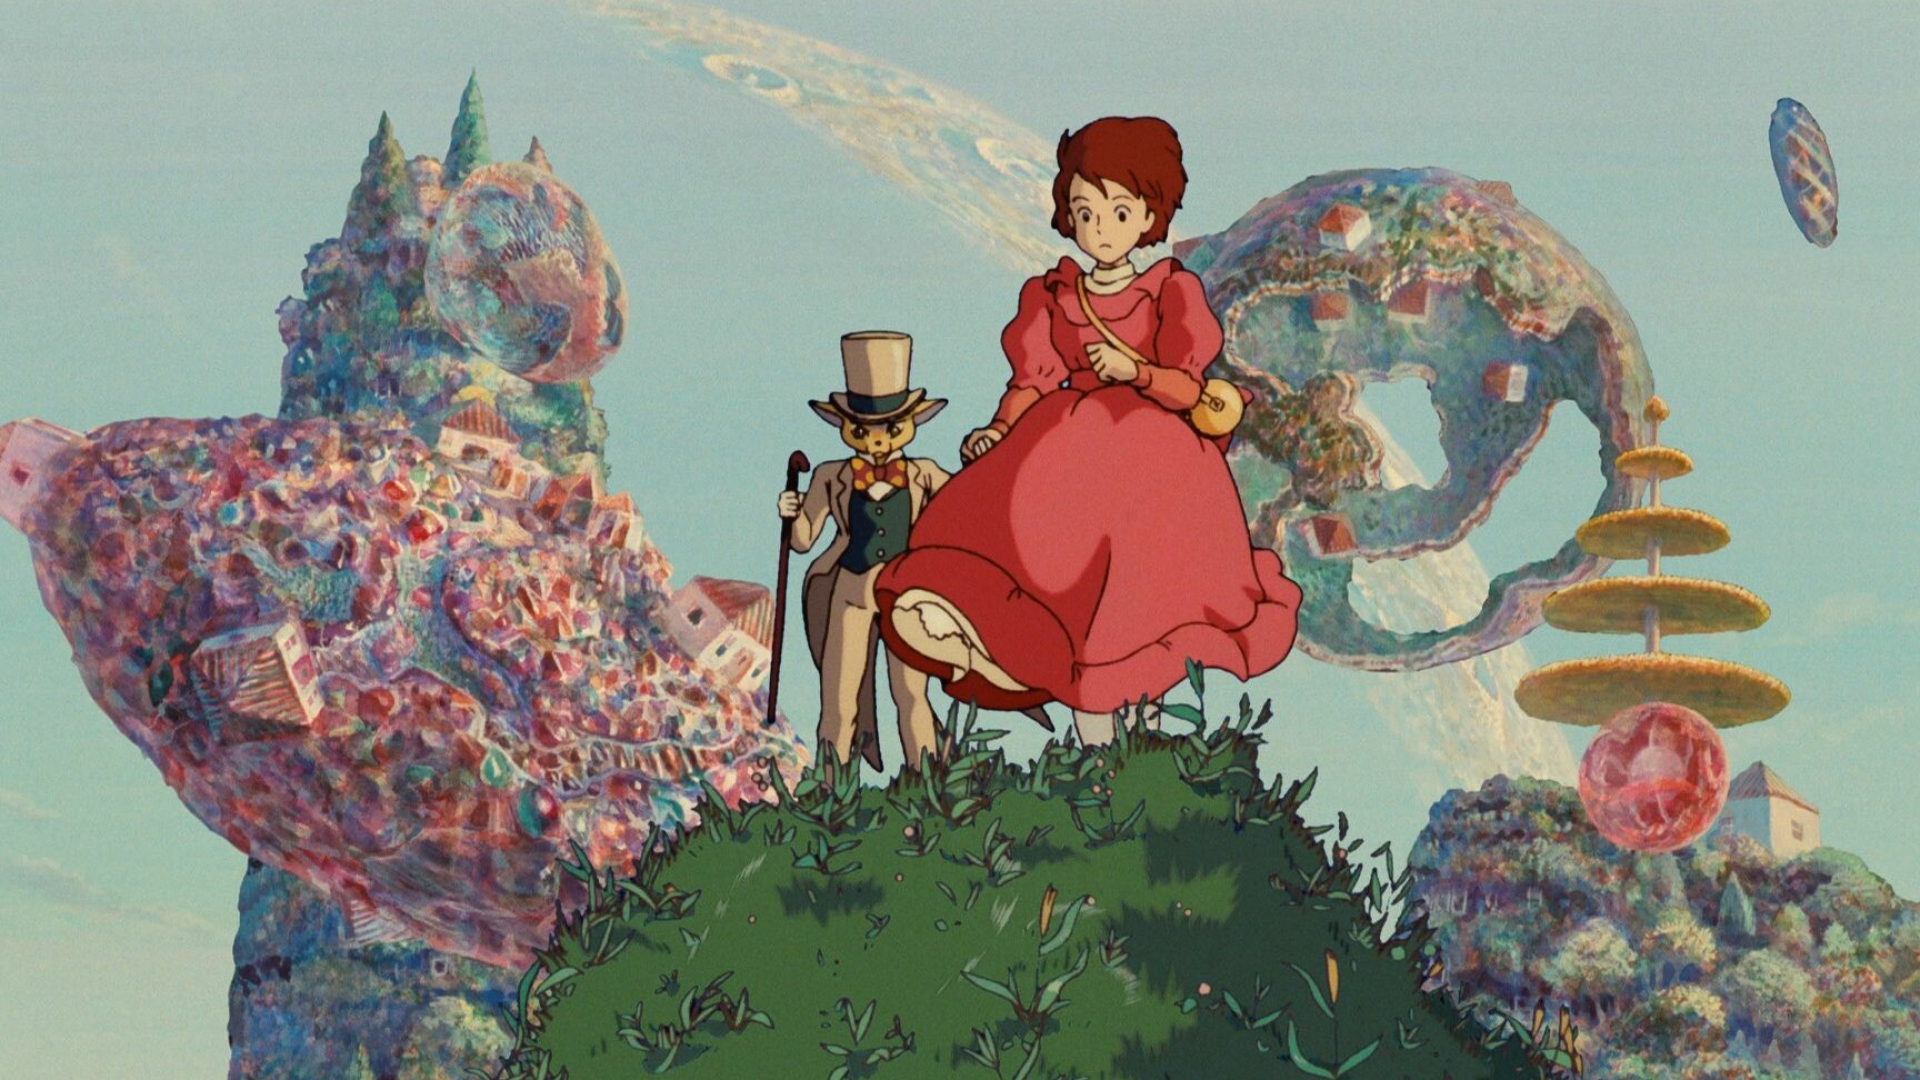 Whisper of the Heart: The first and only feature animation completed by Kondo, the Hayao Miyazaki protege who died unexpectedly at the age of 47 in 1998. 1920x1080 Full HD Wallpaper.